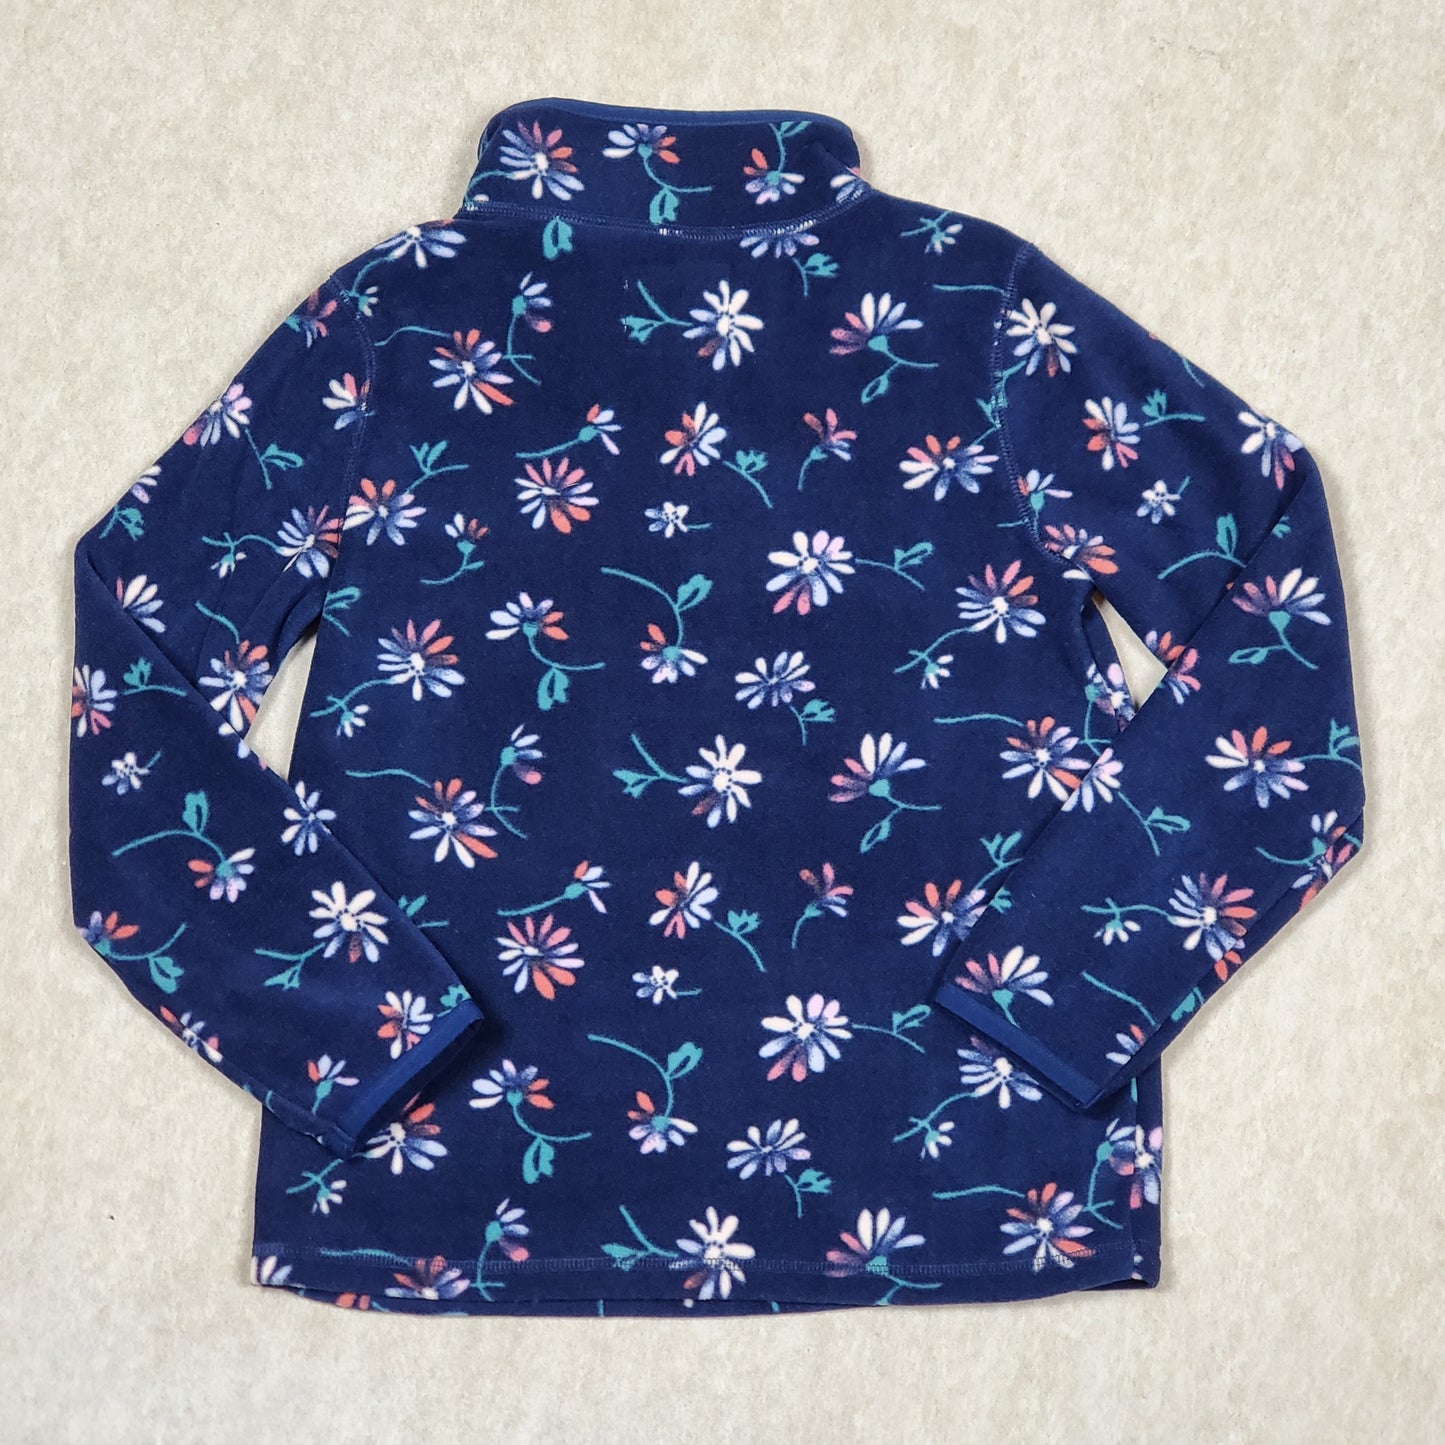 Oshkosh Girls Navy Floral Fleece Pullover Size 7 NWT Used View 2